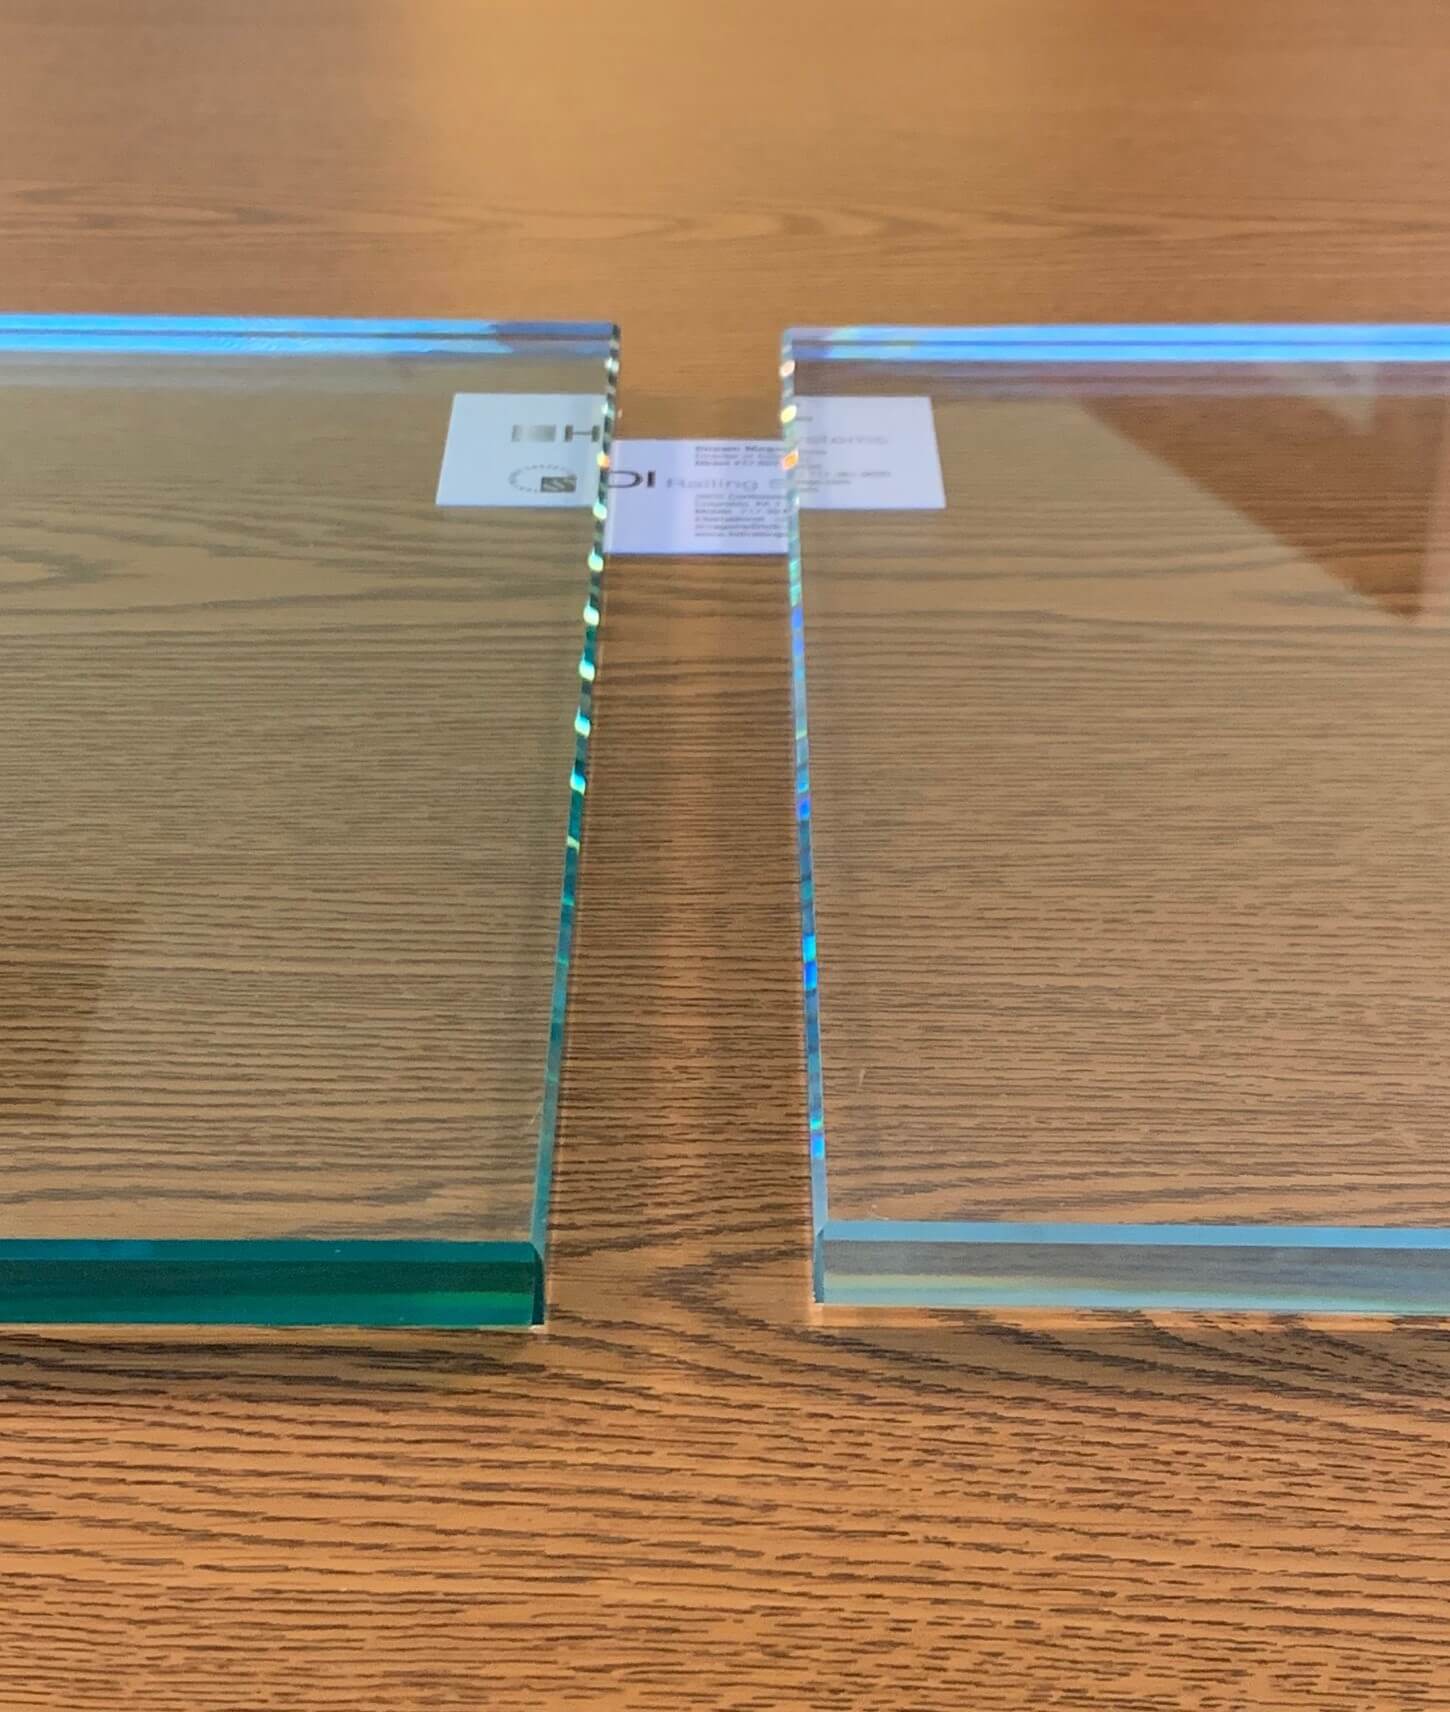 Glass Options: (left) Standard glass (right) Low Iron glass